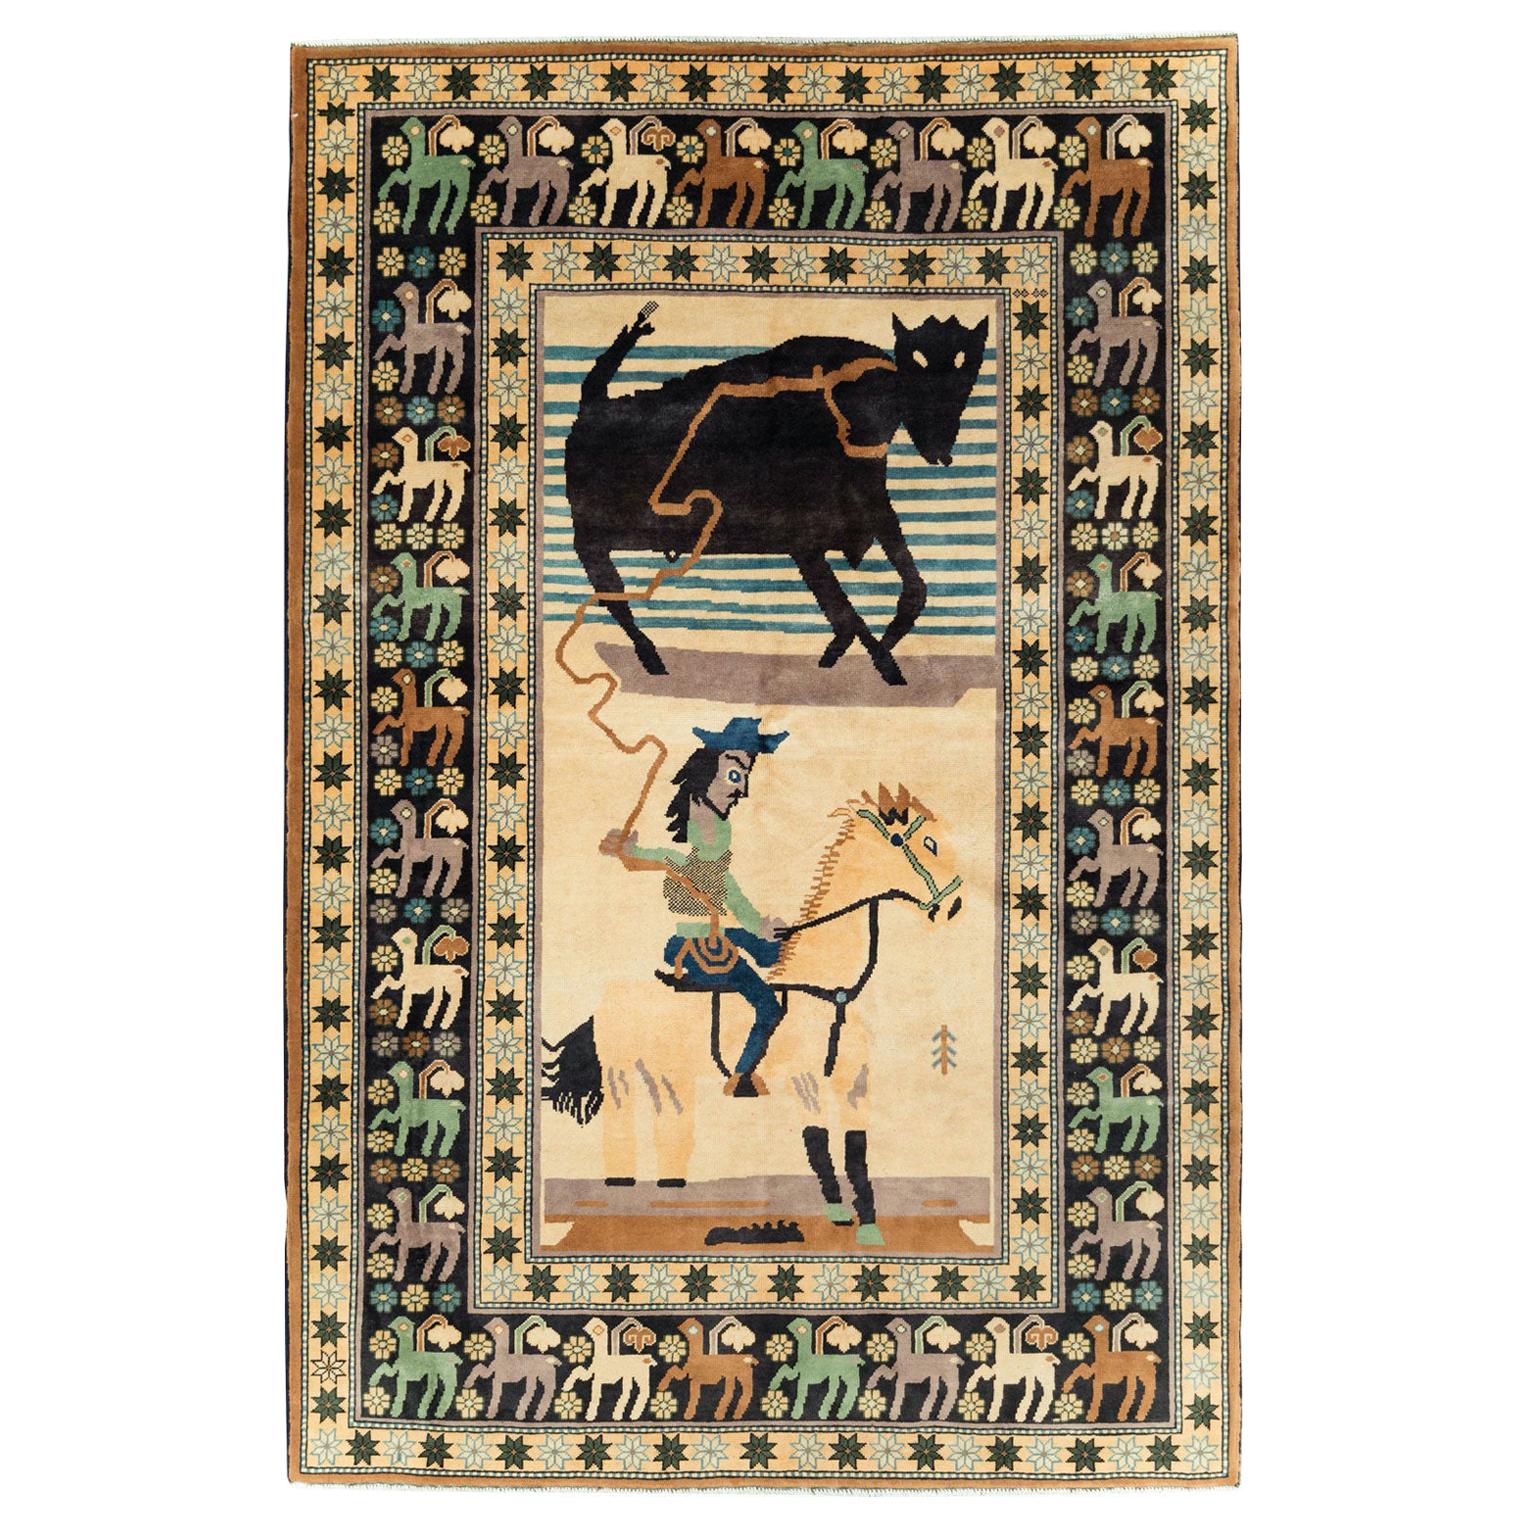 Contemporary Handmade Turkish Pictorial Accent Rug of a Steer Roping Cowboy